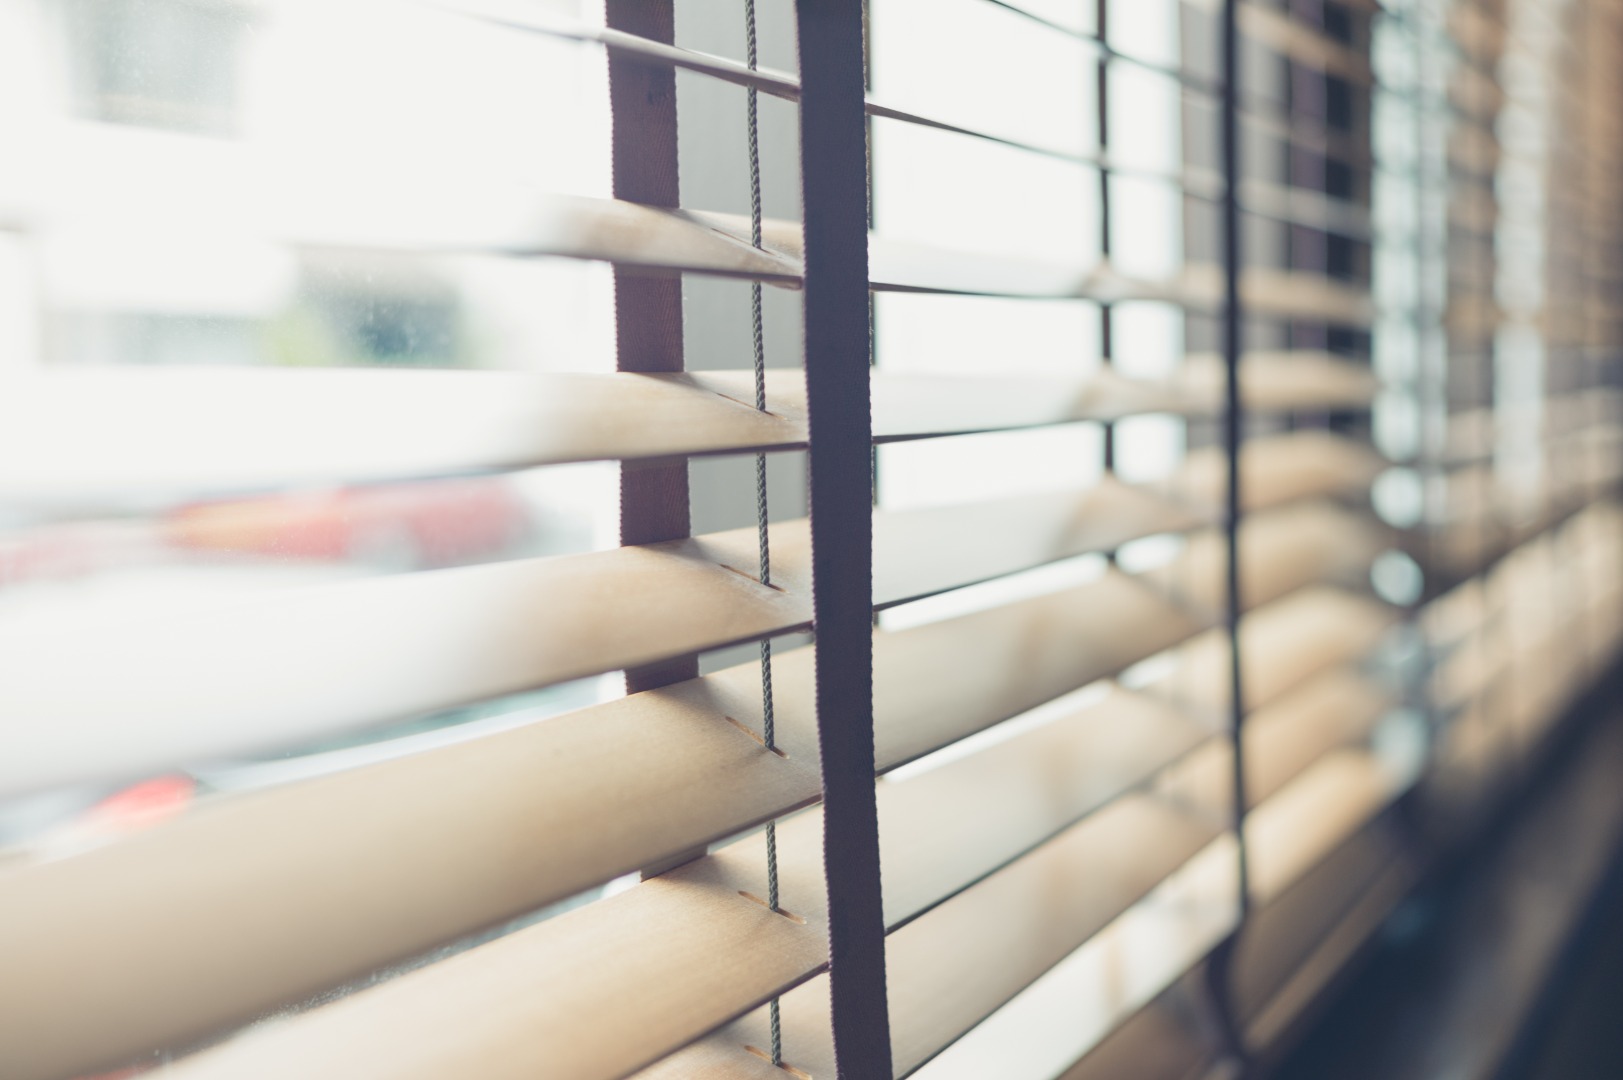 Make Venetian blinds the perfect furnishing for your home office